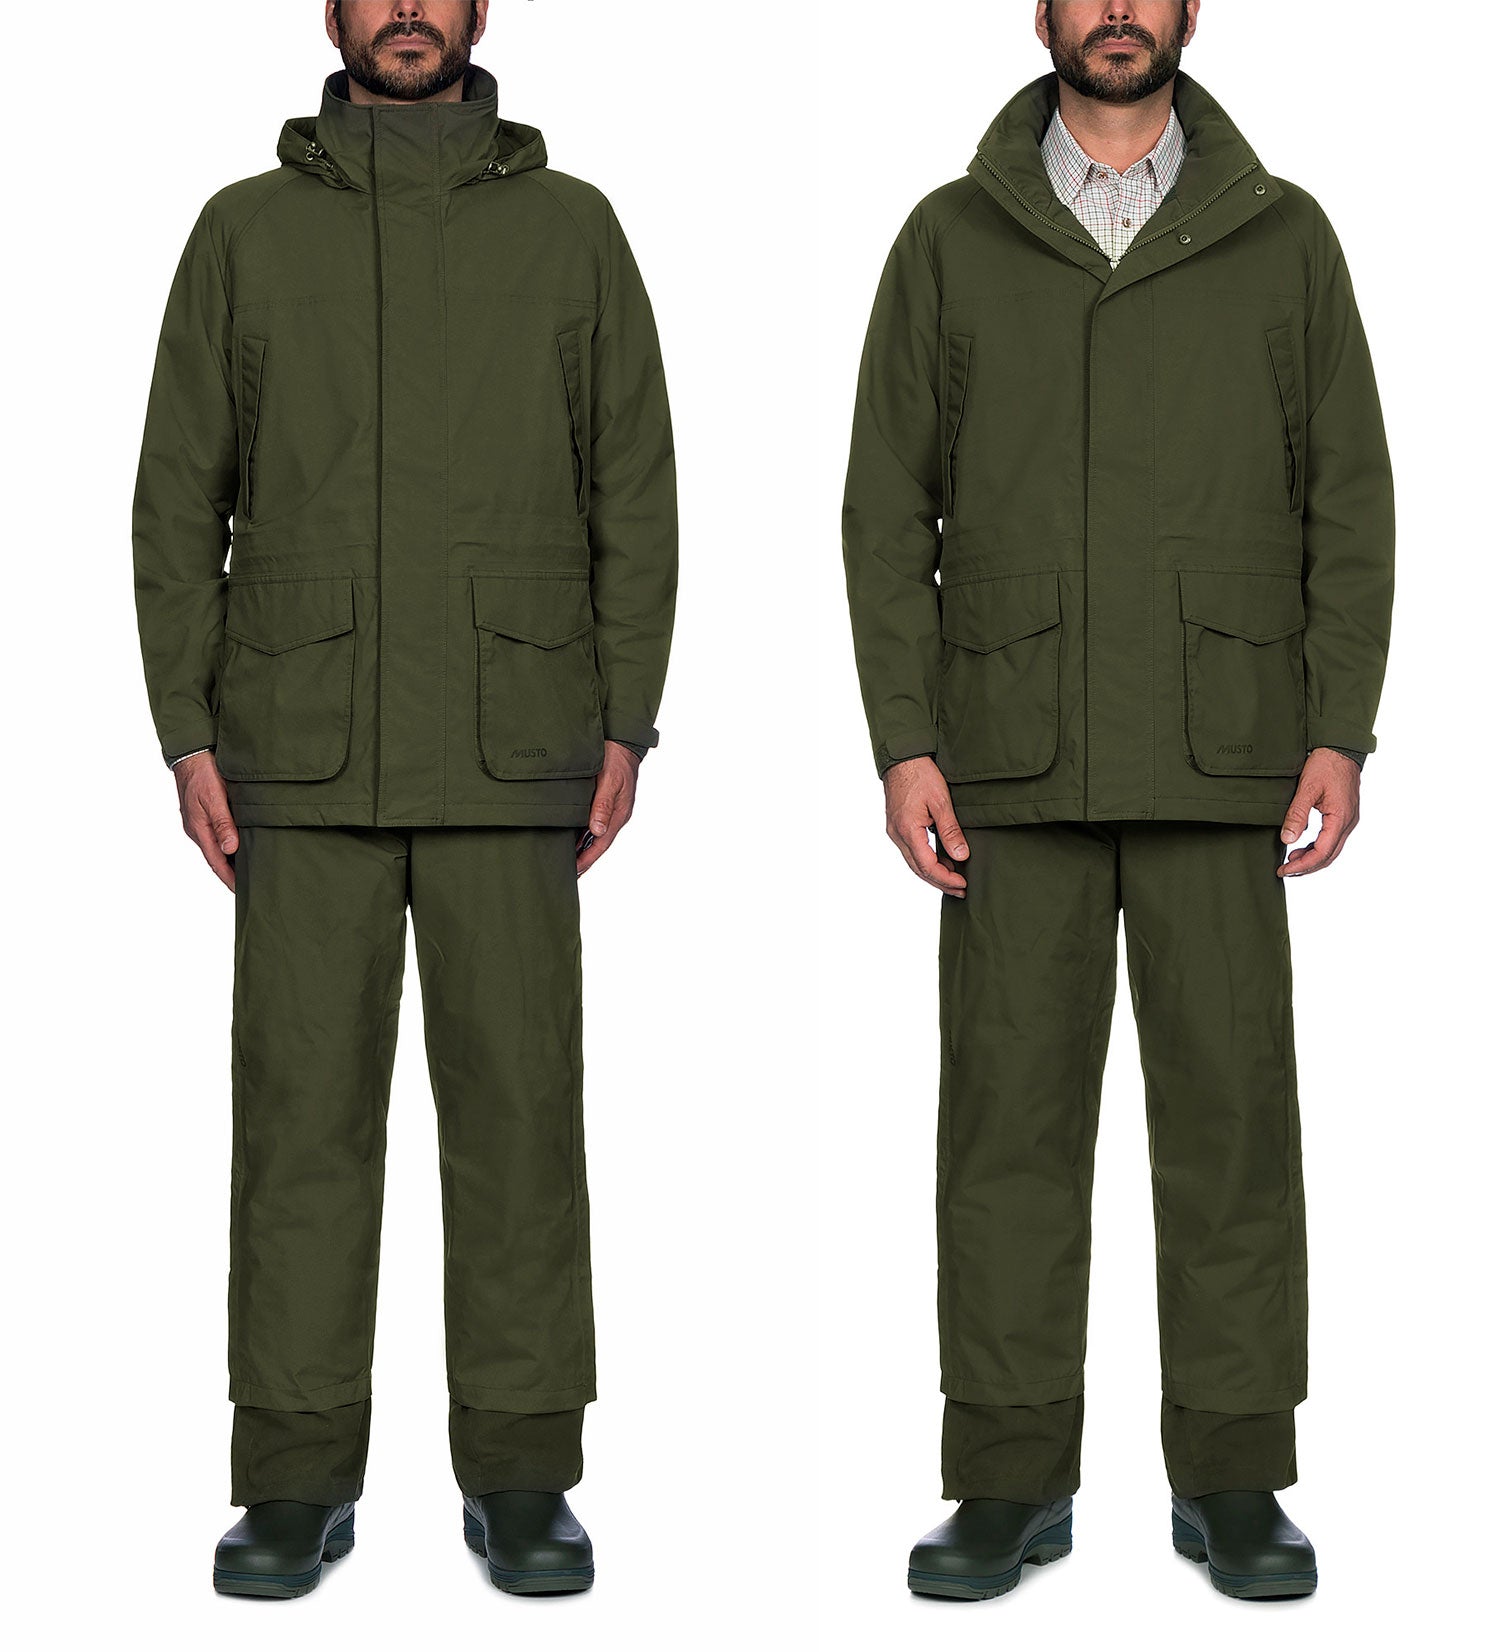 Showing Collar open and closed Musto Fenland BR2 Packaway Jacket